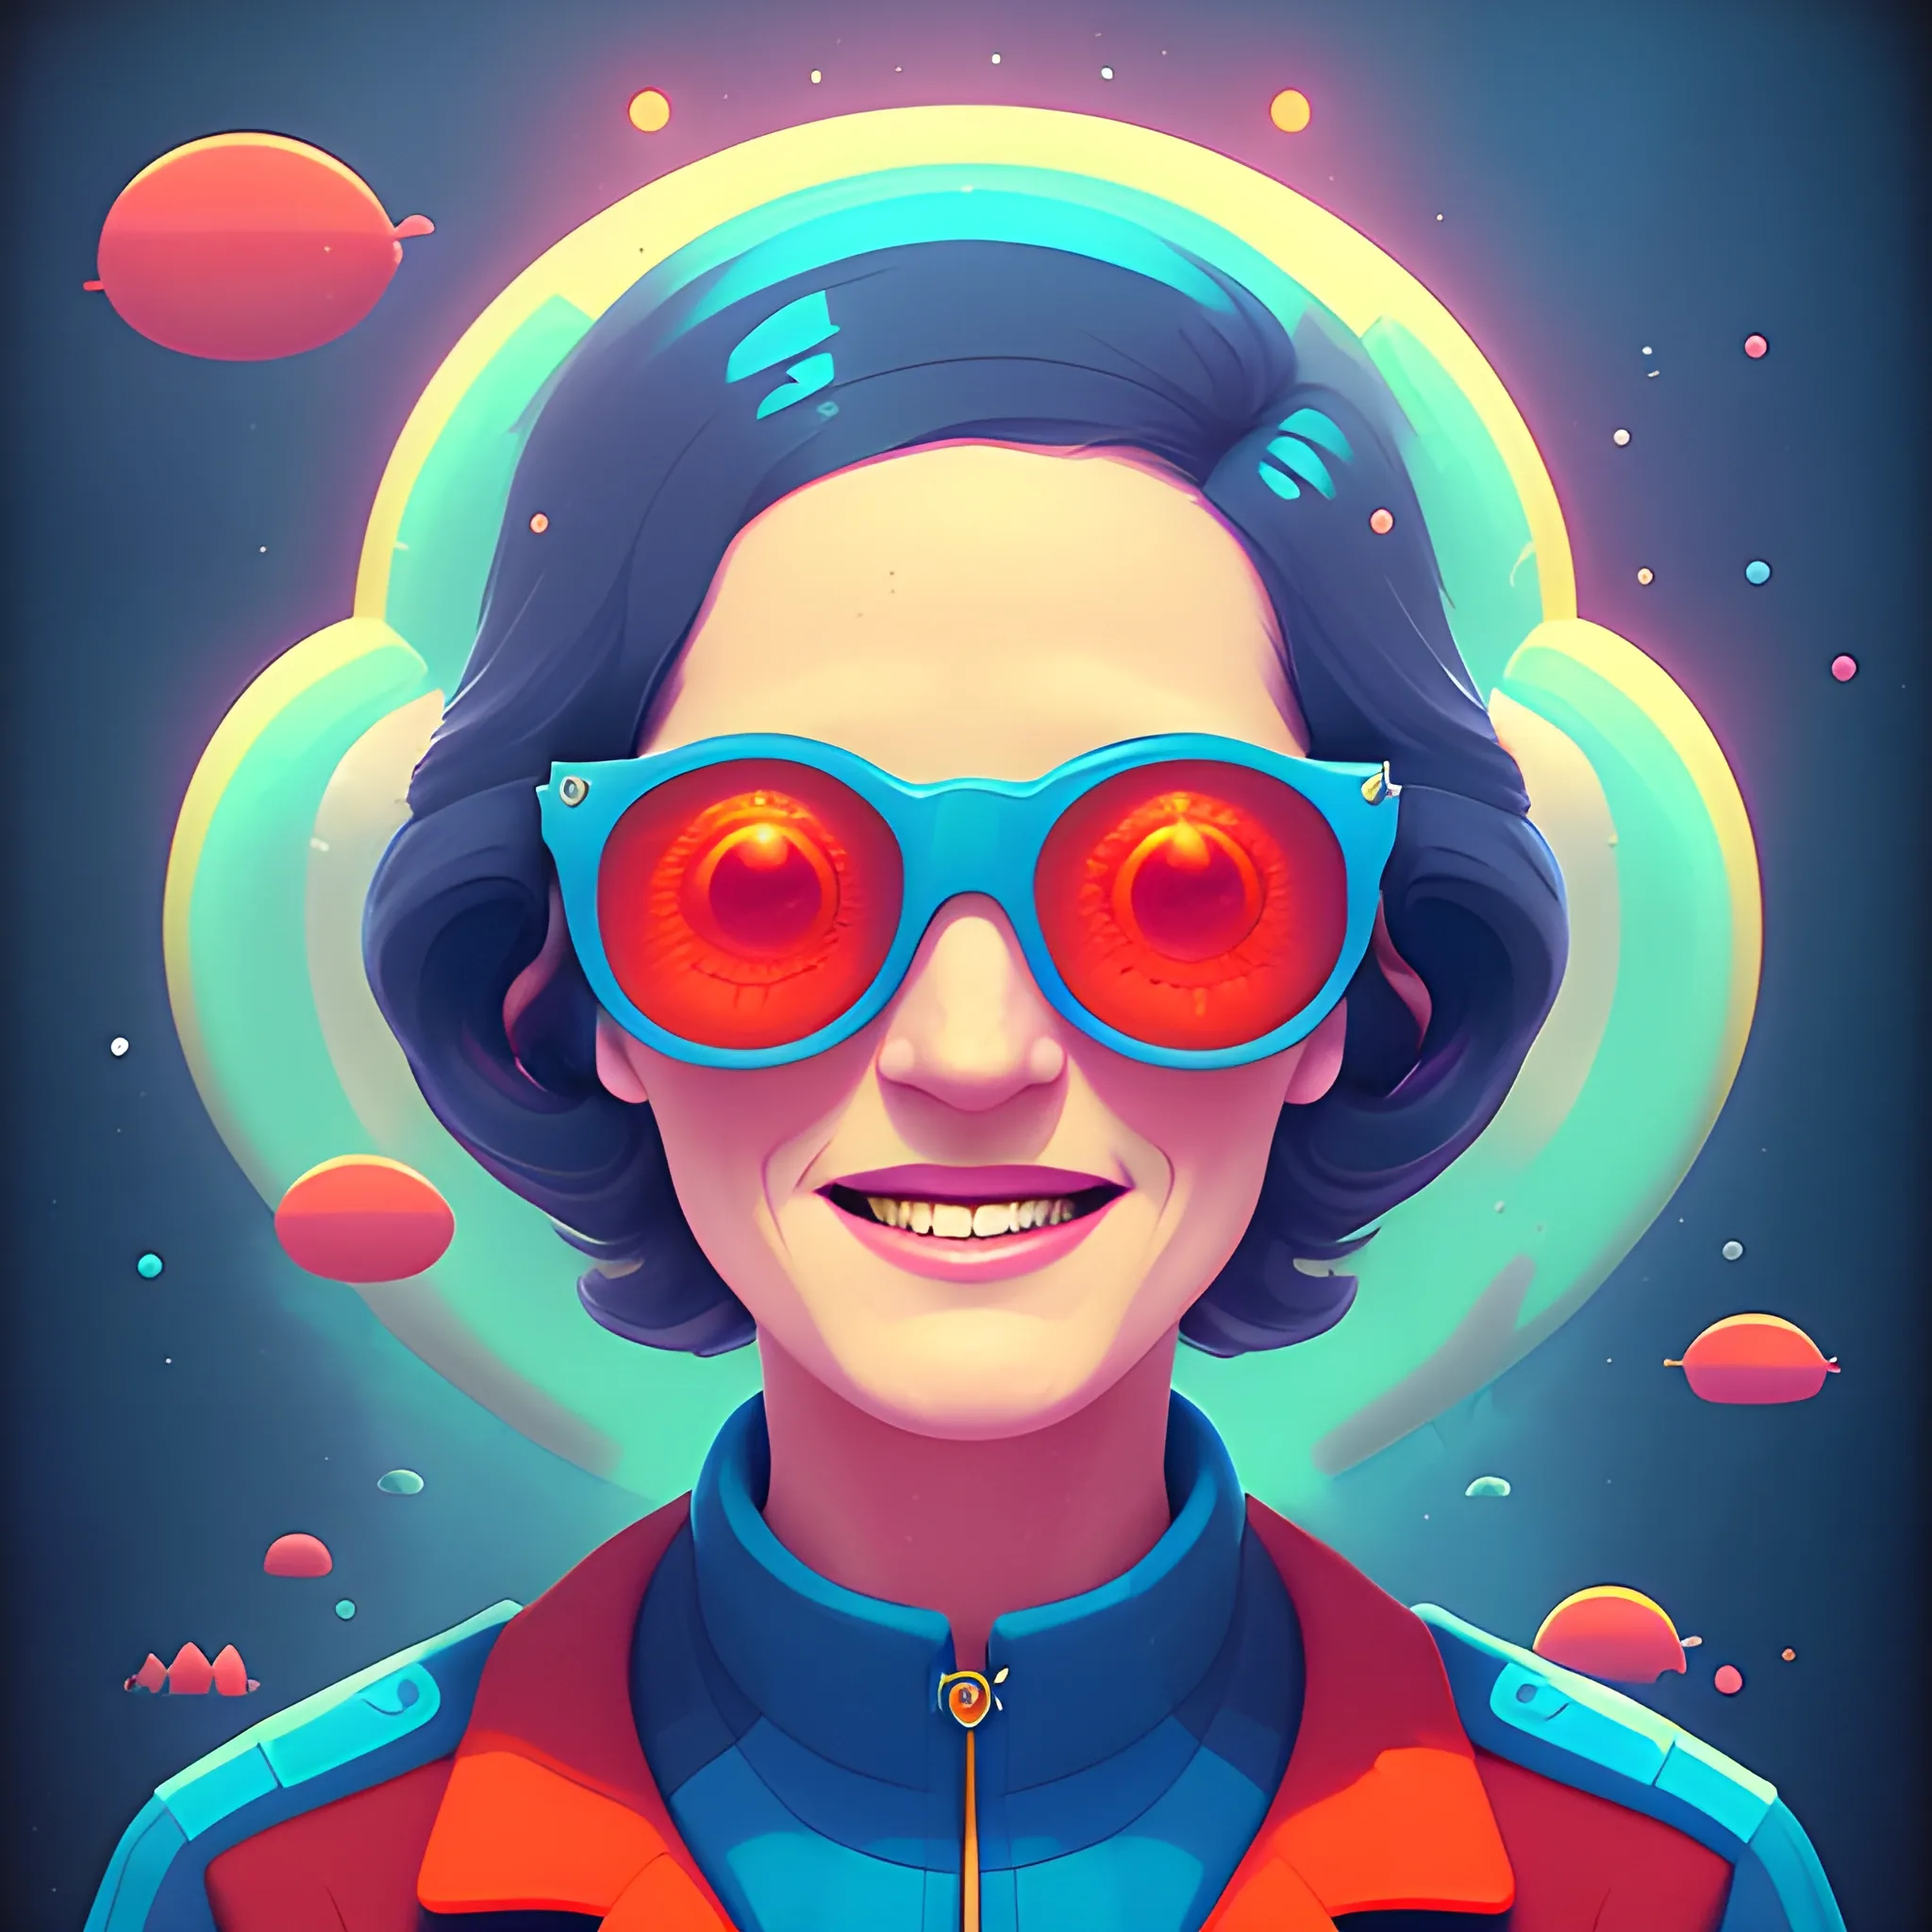 Friendly wise mature female government worker. Should be warm, cheerful, knowledgeable, and smiling. by petros afshar, ross tran, Tom Bagshaw, tom whalen, underwater bubbly psychedelic clouds, Anaglyph 3D lens blur effect
